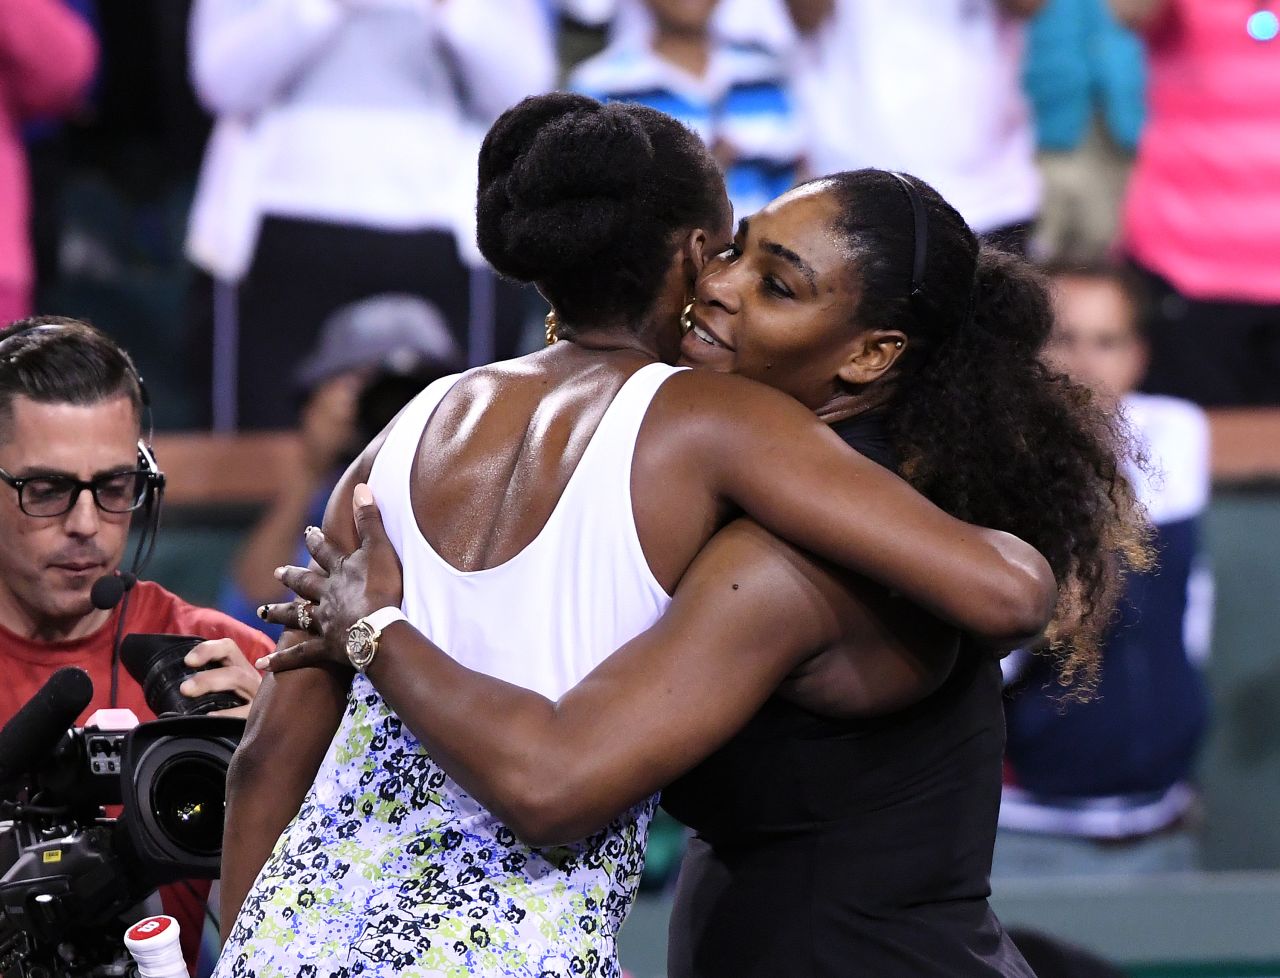 After saving a break point in the last game, it was Venus who prevailed 6-3 6-4 to move into the fourth round. 